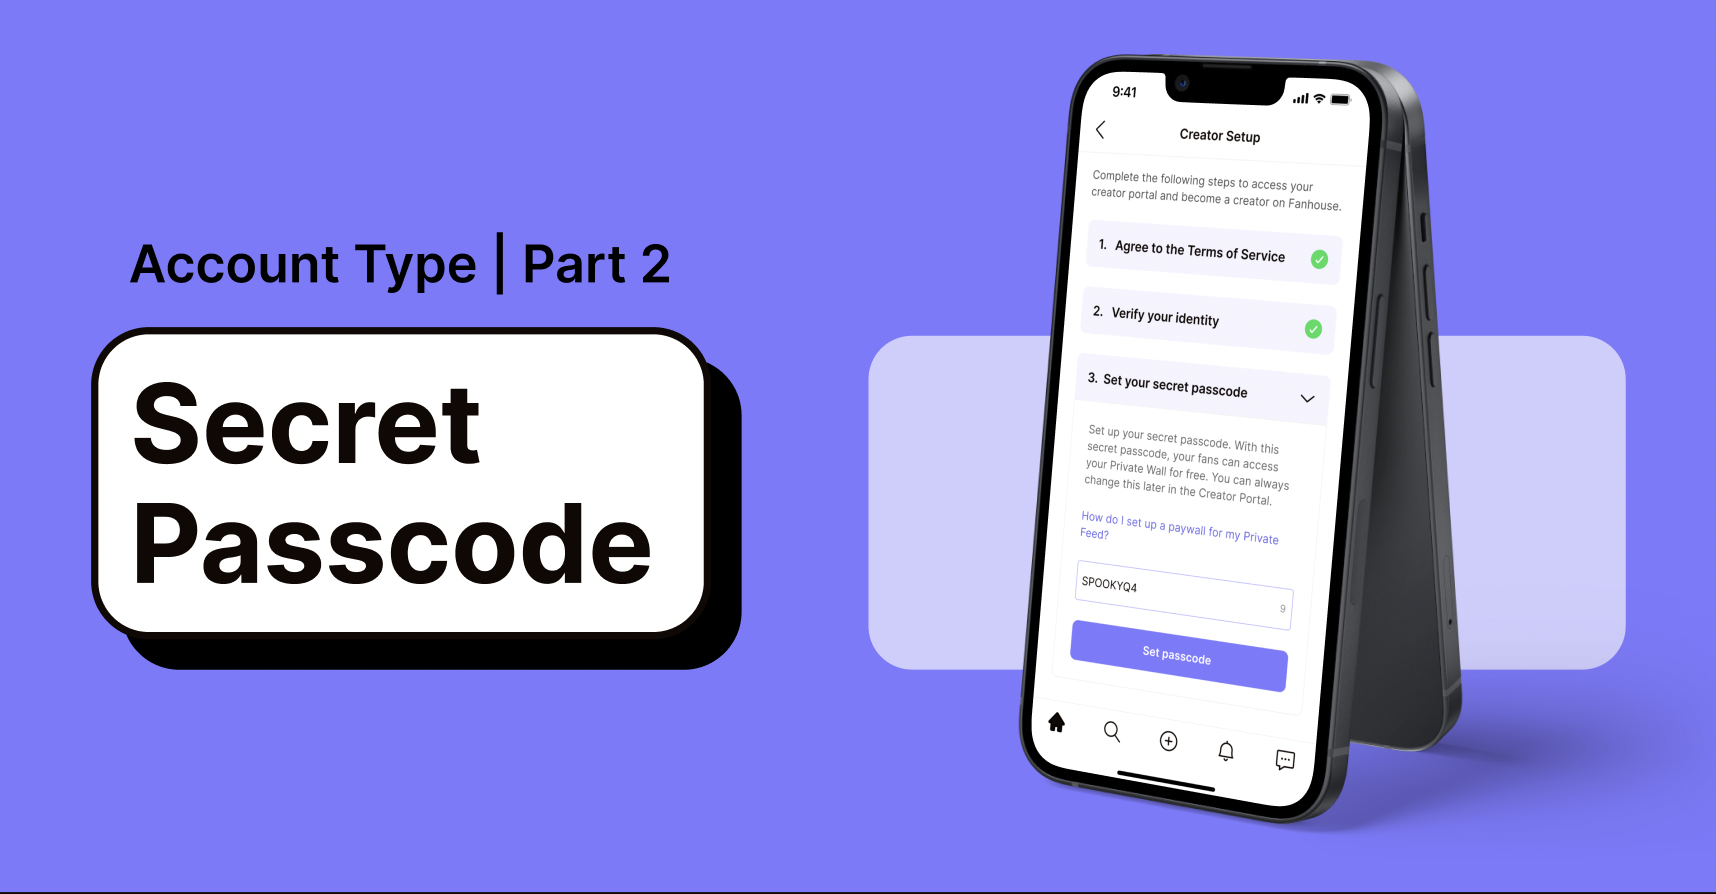 Getting Started as a Creator (Part 2) — Setting up a secret passcode account